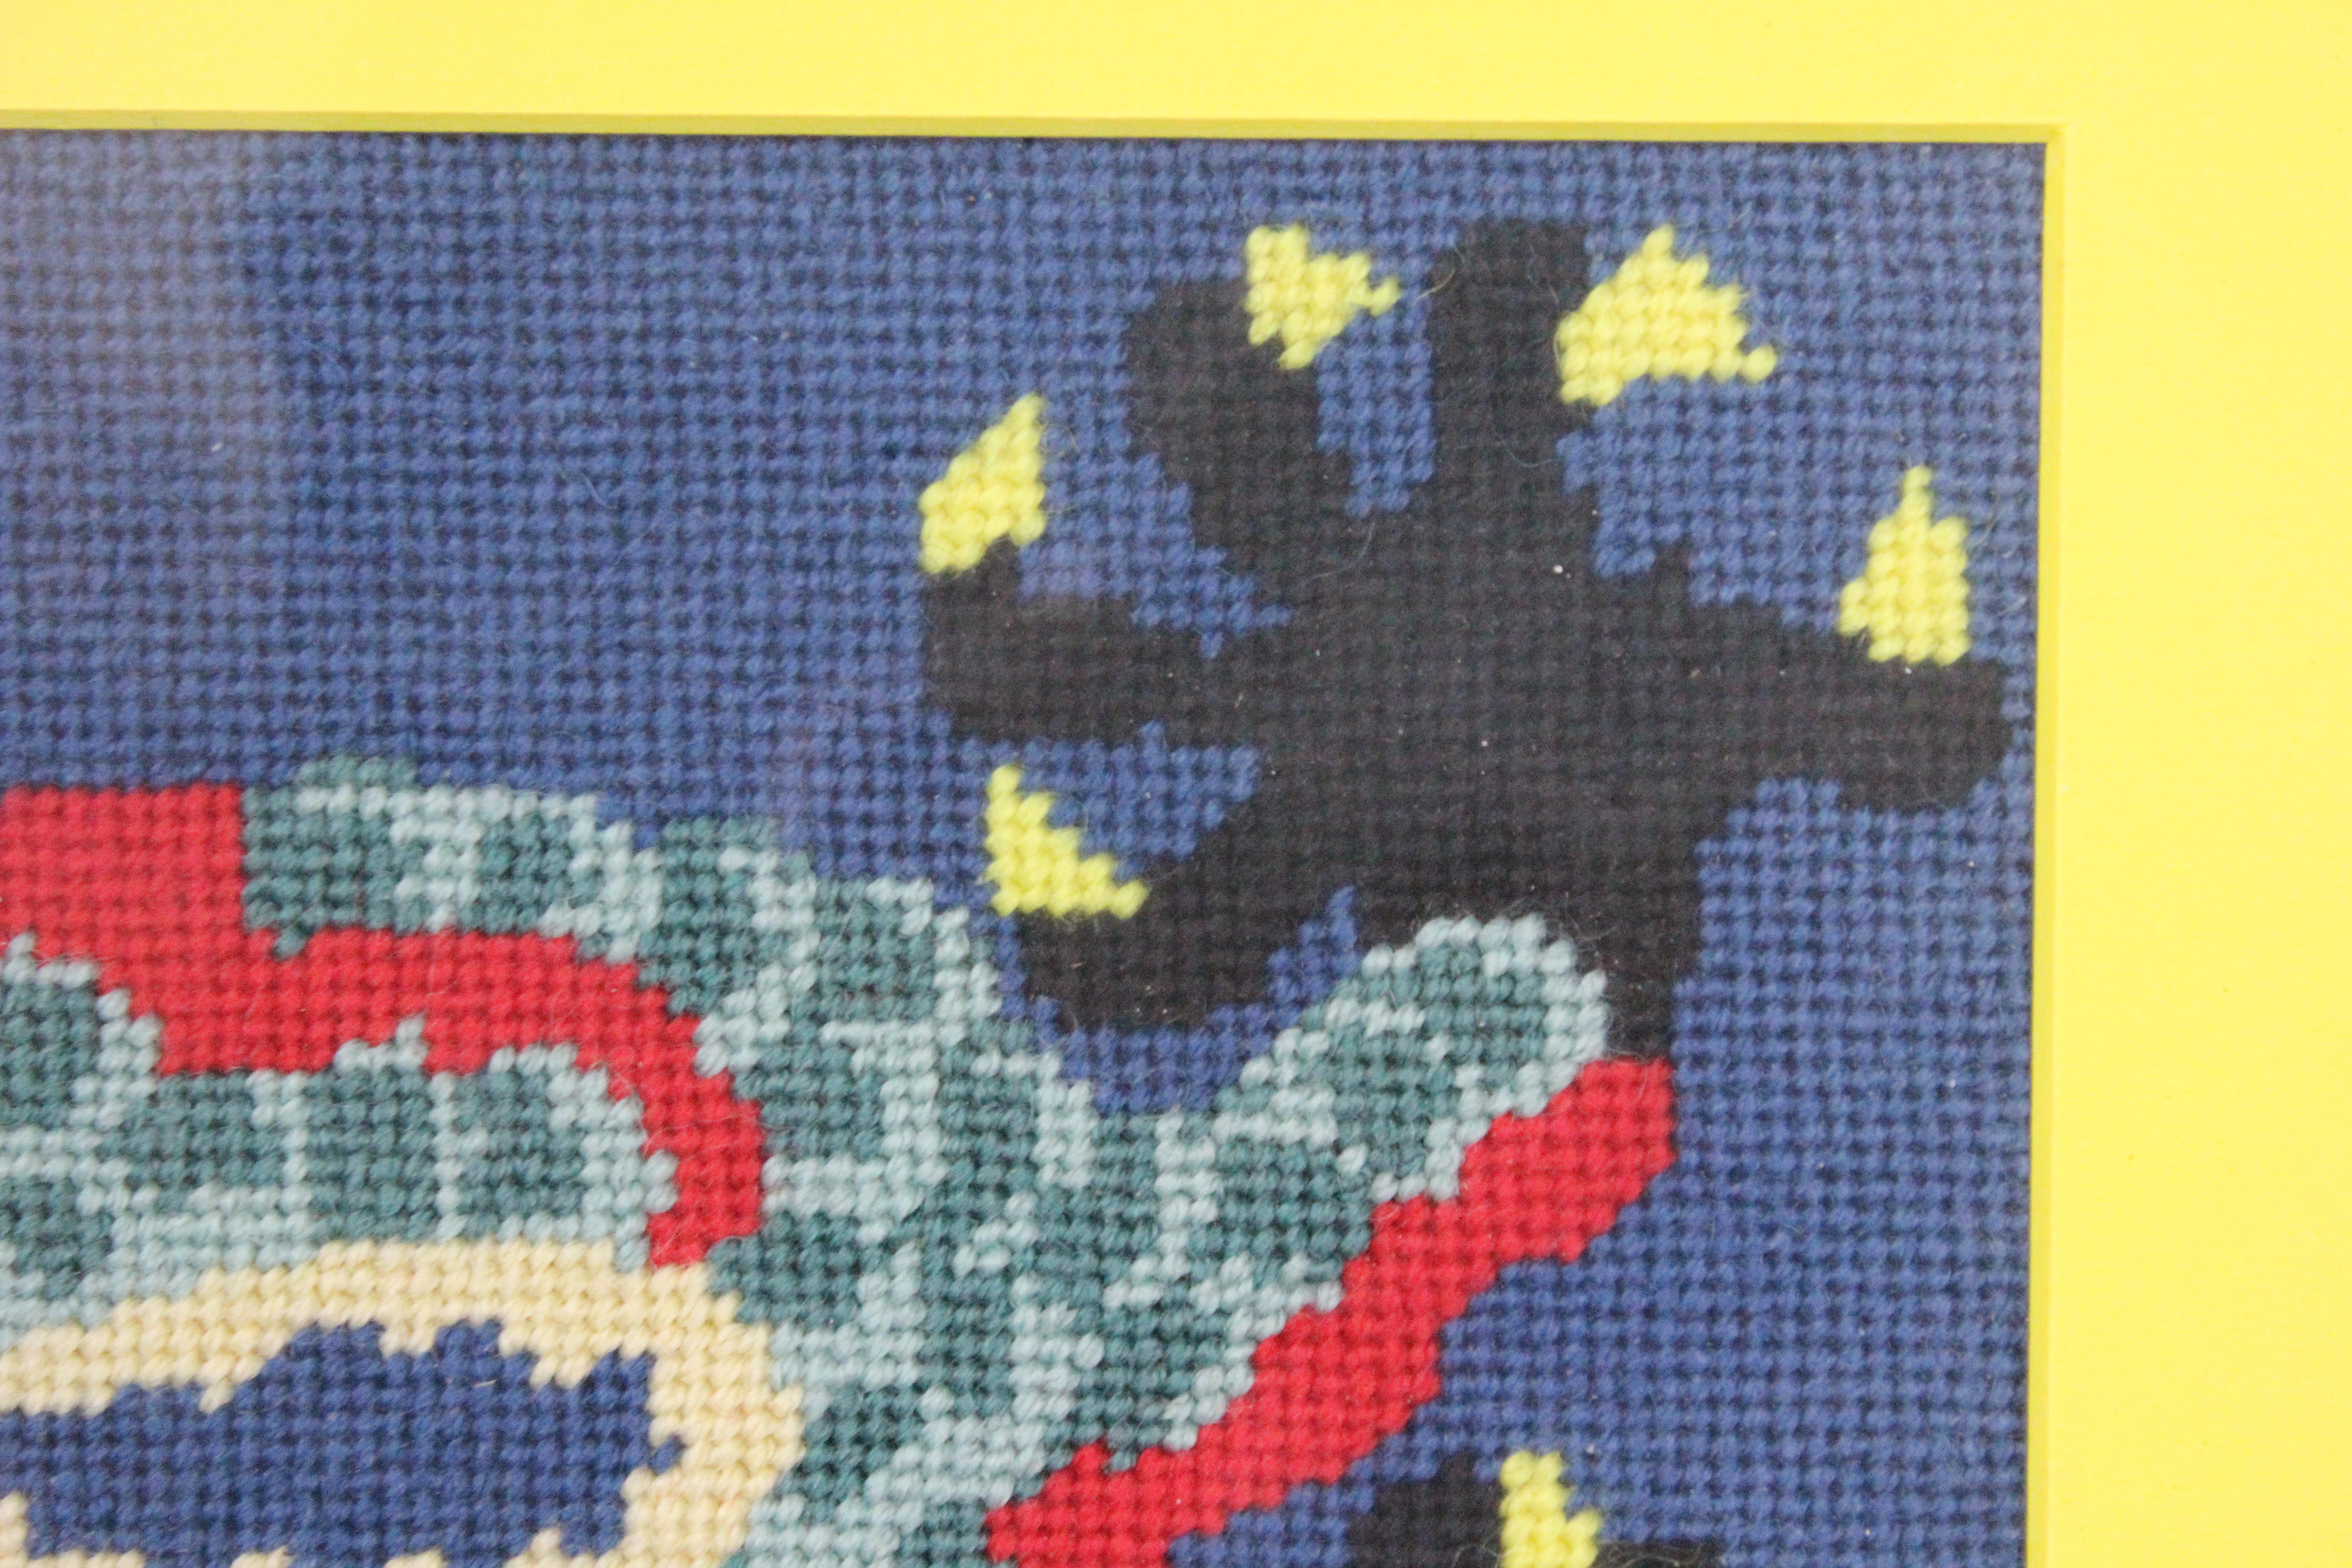 c1960s  needlepoint depicting a Chinese dragon

Panel Sz: 6